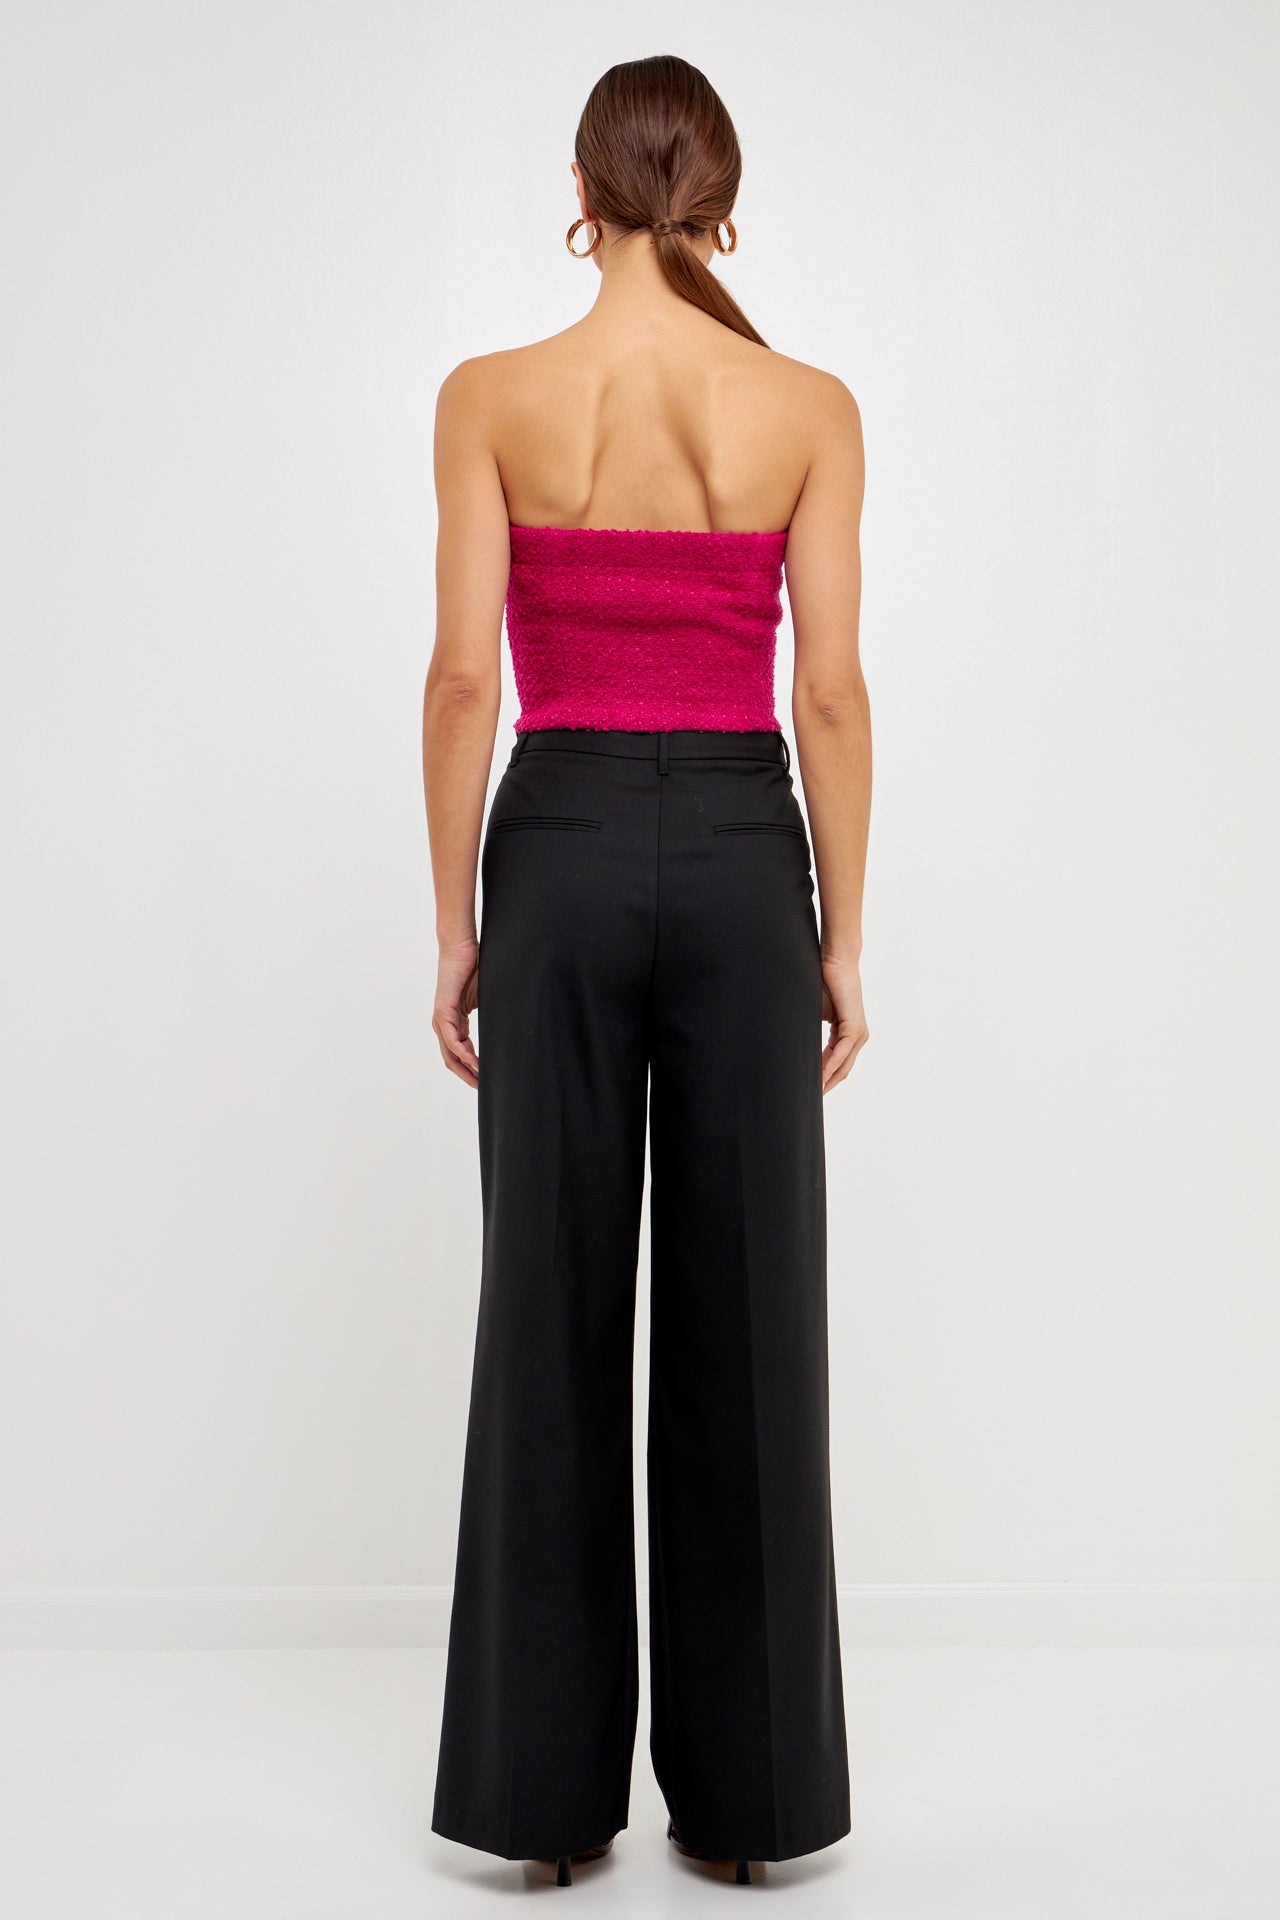 ENDLESS ROSE - Bouclé Crop Top - TOPS available at Objectrare